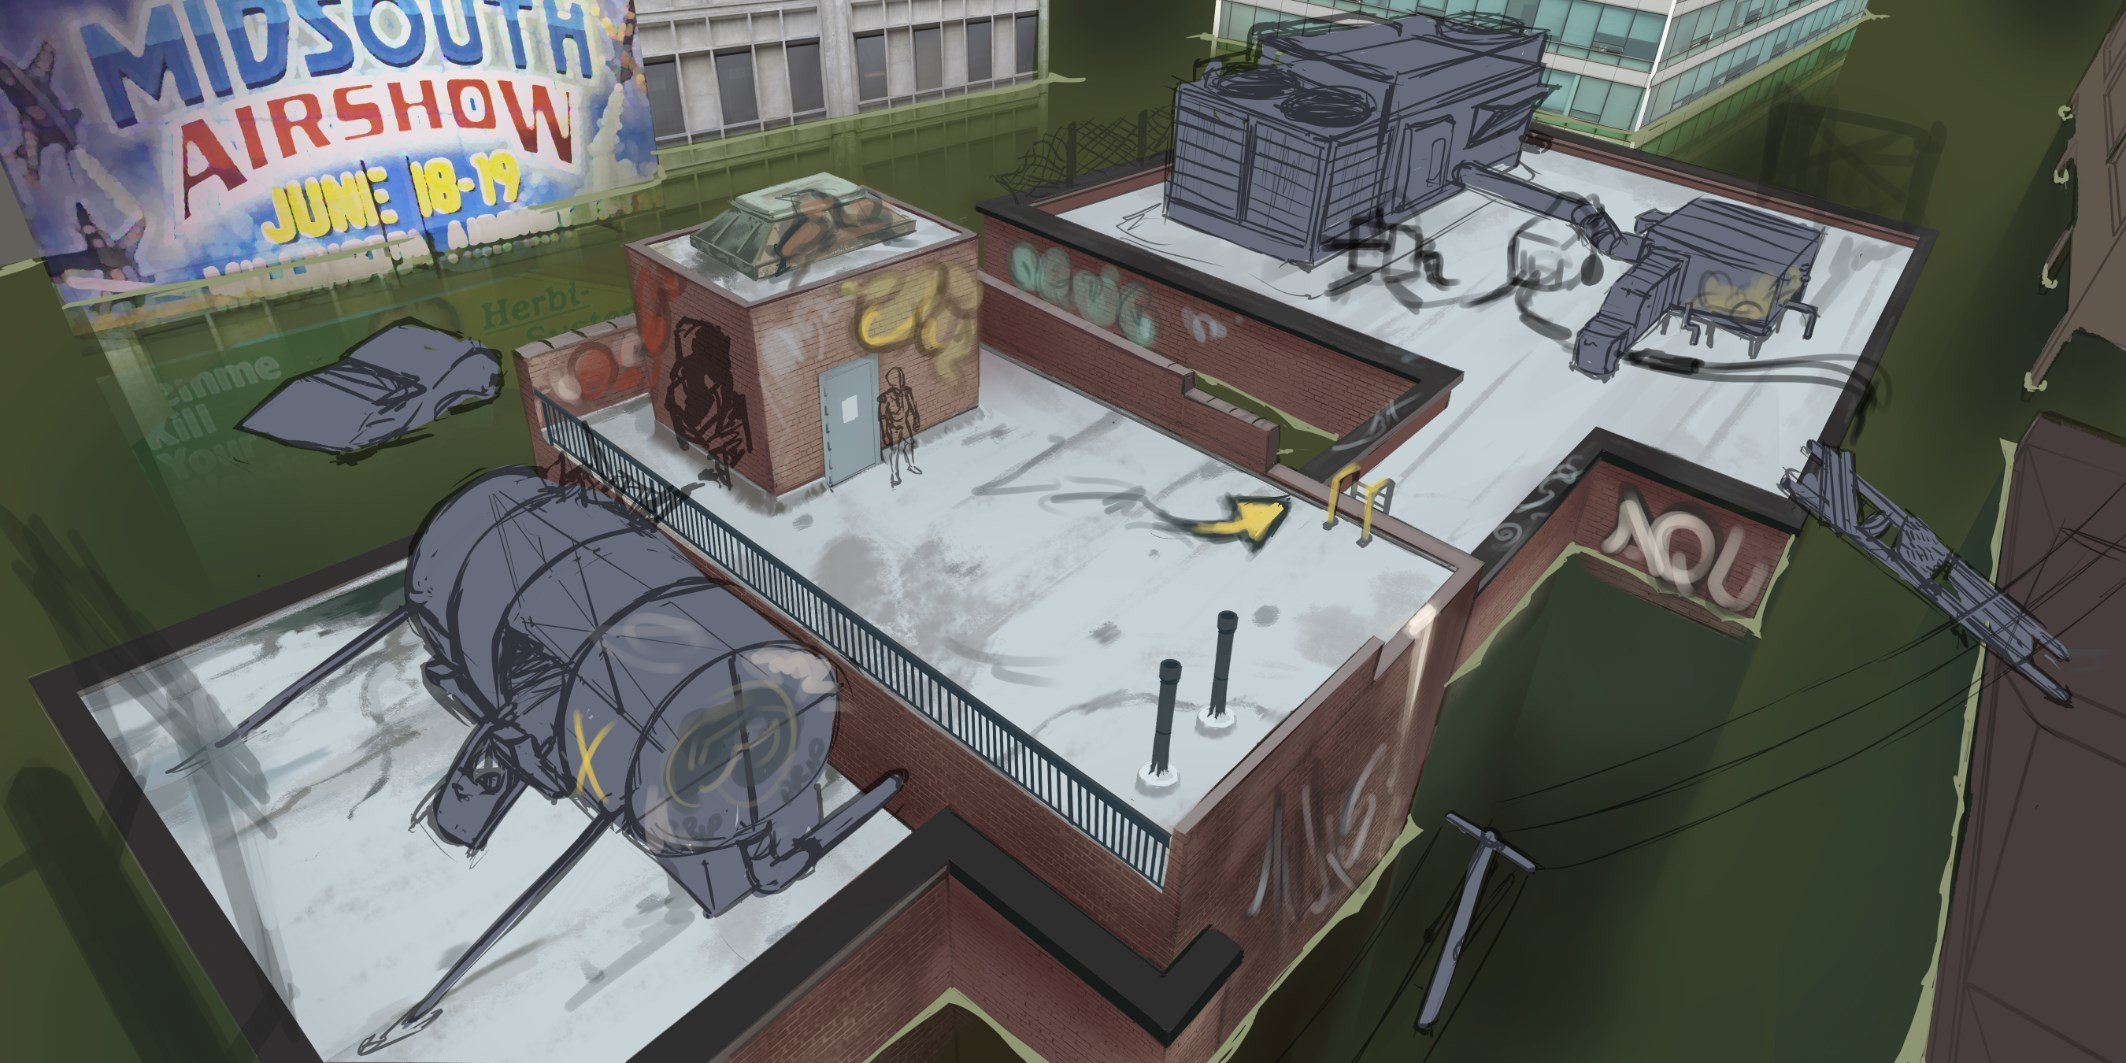 Sketching in some props to fit in on these rooftops to convey the scene and be environmental cover. 